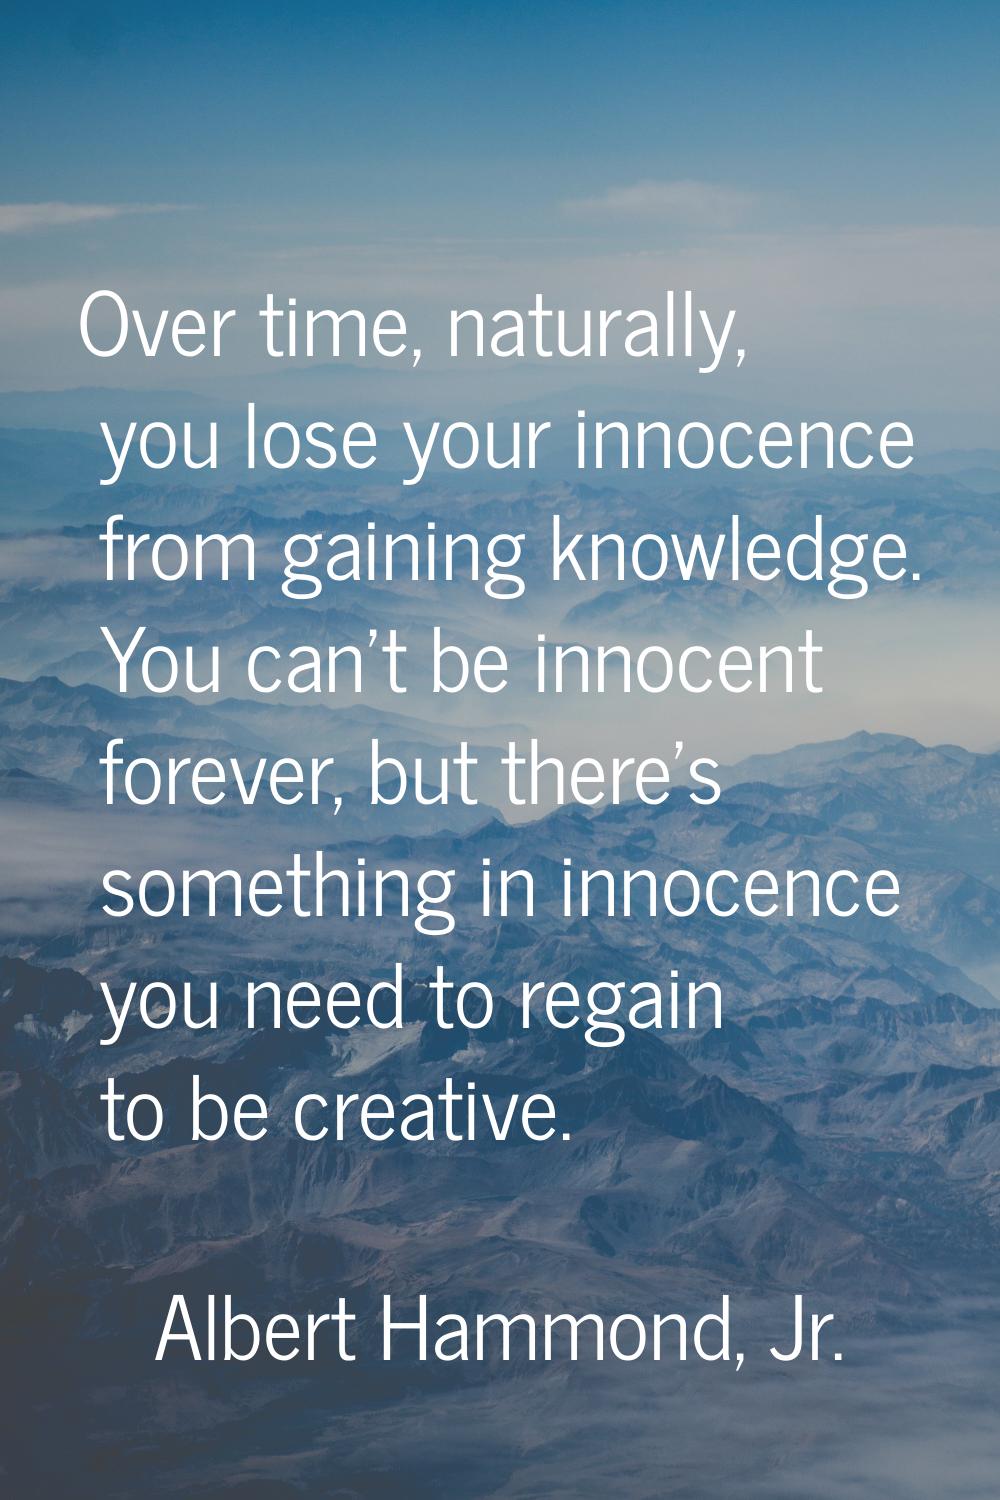 Over time, naturally, you lose your innocence from gaining knowledge. You can't be innocent forever